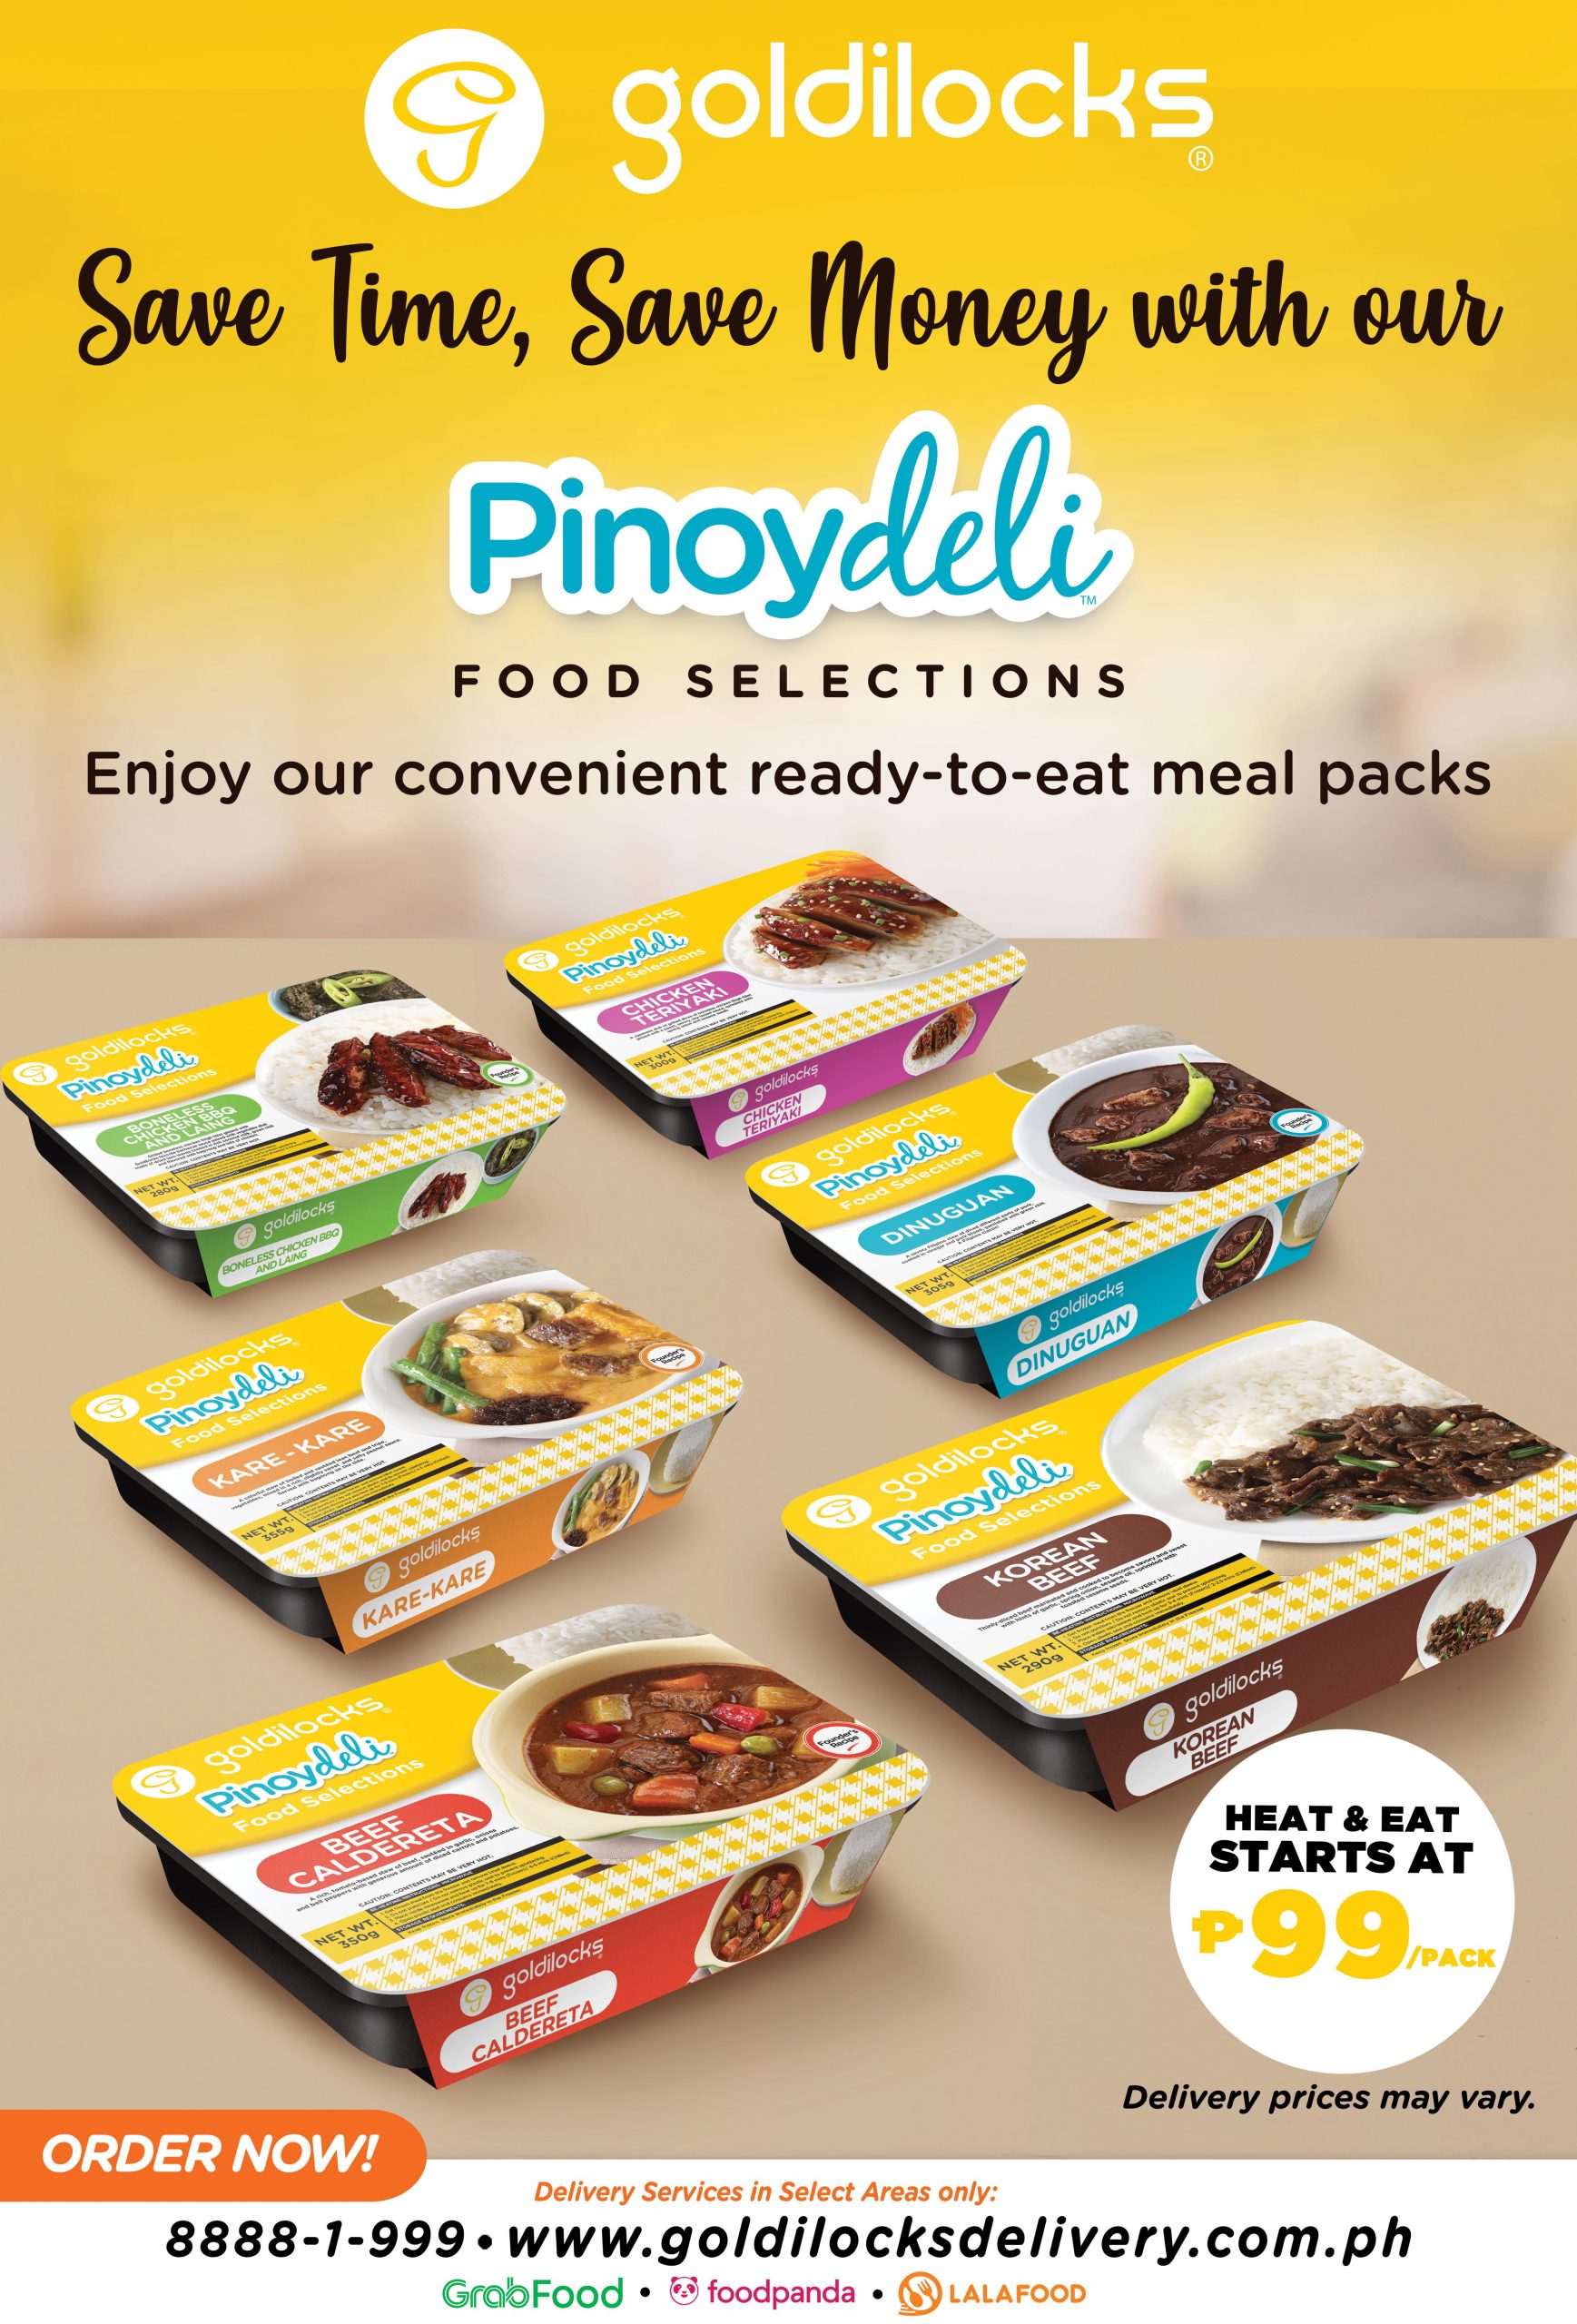 Eat like you're dining out with Goldilocks' Pinoy Deli Food